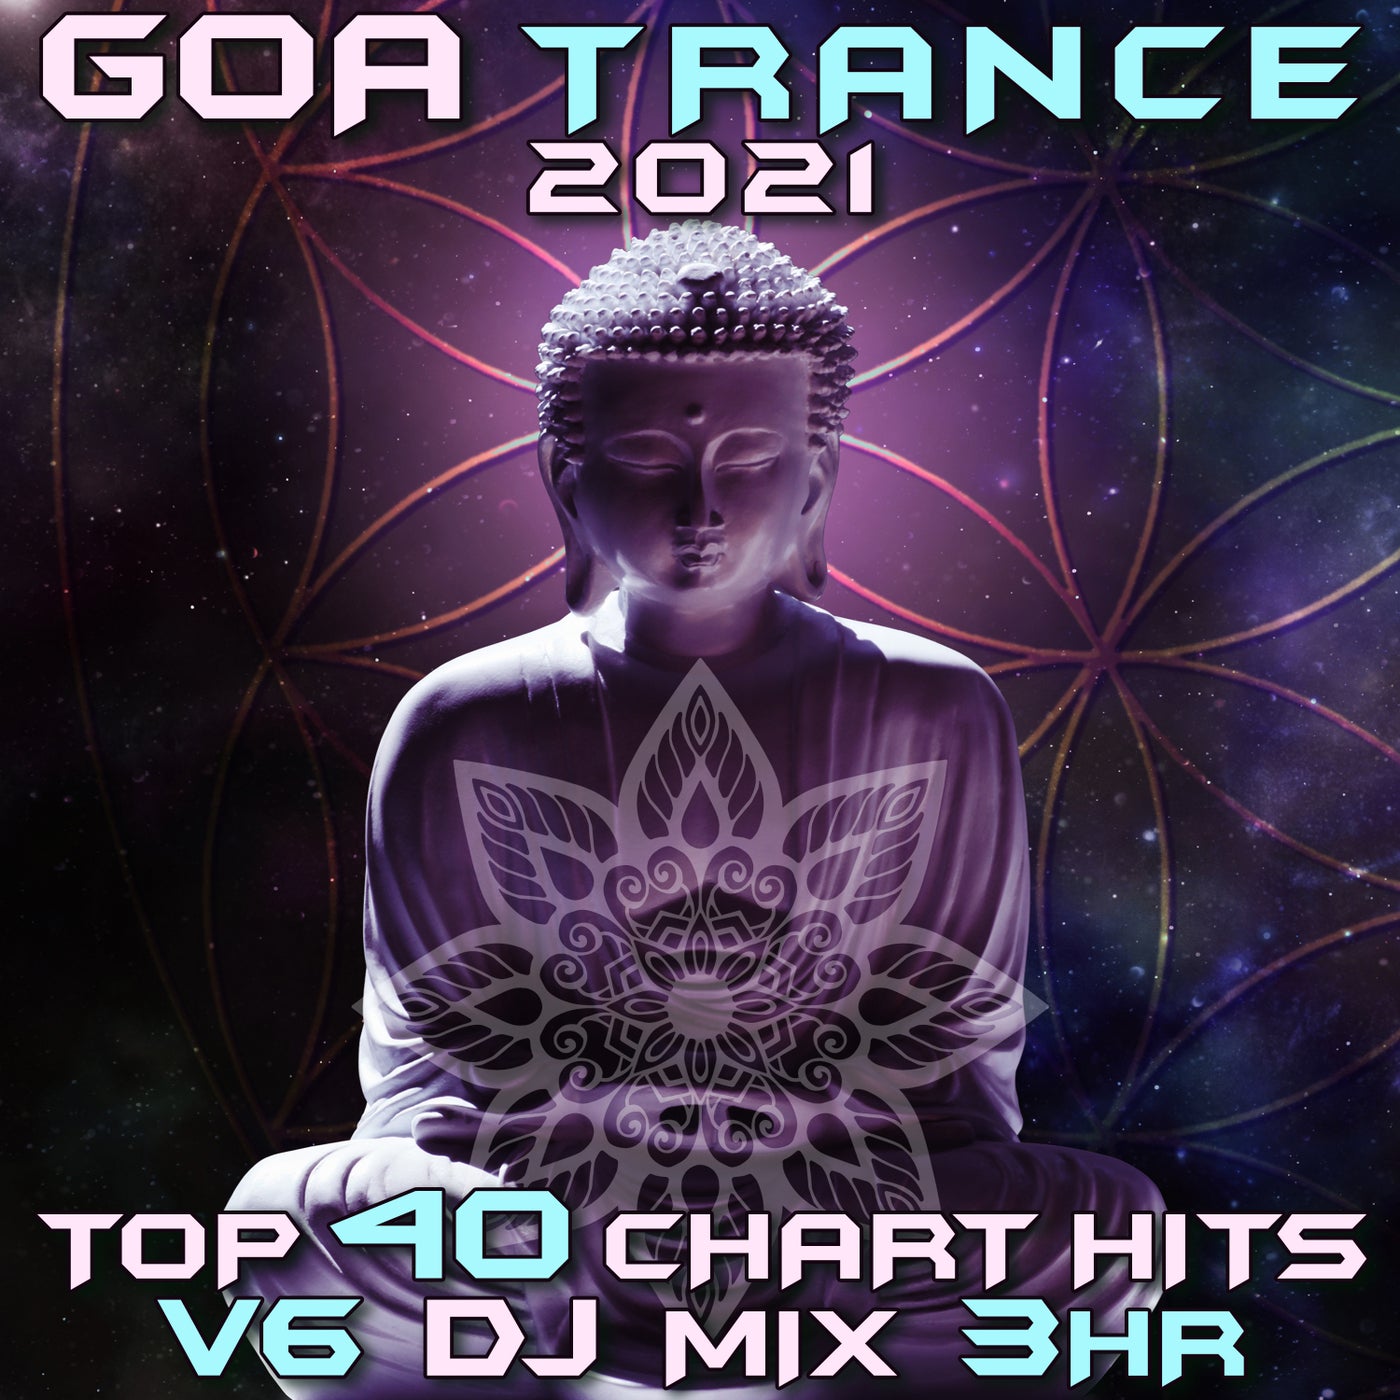 Goa Trance 2021 by Pleiadians, Somnesia, Psychedelic Quest, Celestial  Twins, Nova Fractal, Nostromosis, NK47, Sixsense, Wizard Project, Barmohak,  Goastral, Tranquility Base Project, Eclectic Attack, Human Intelligence,  Chassi, Freedom Force, Suntra ...